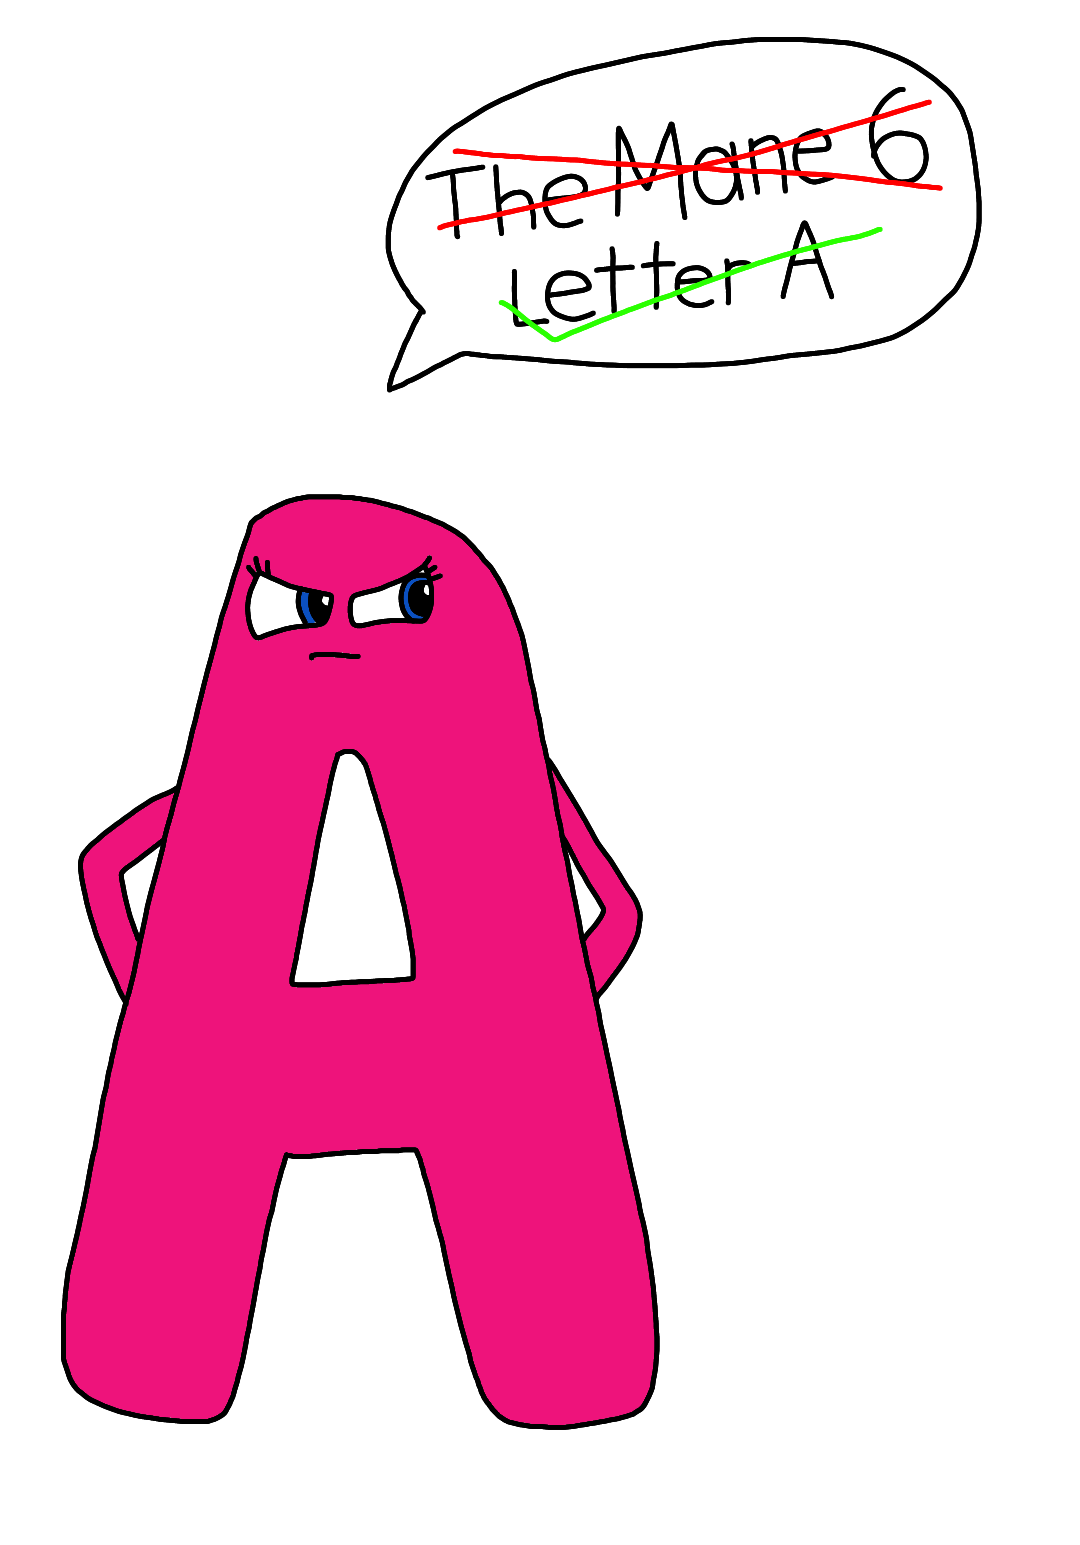 Charlie and the Alphabet Letter A hates The Mane 6 Blank Meme Template